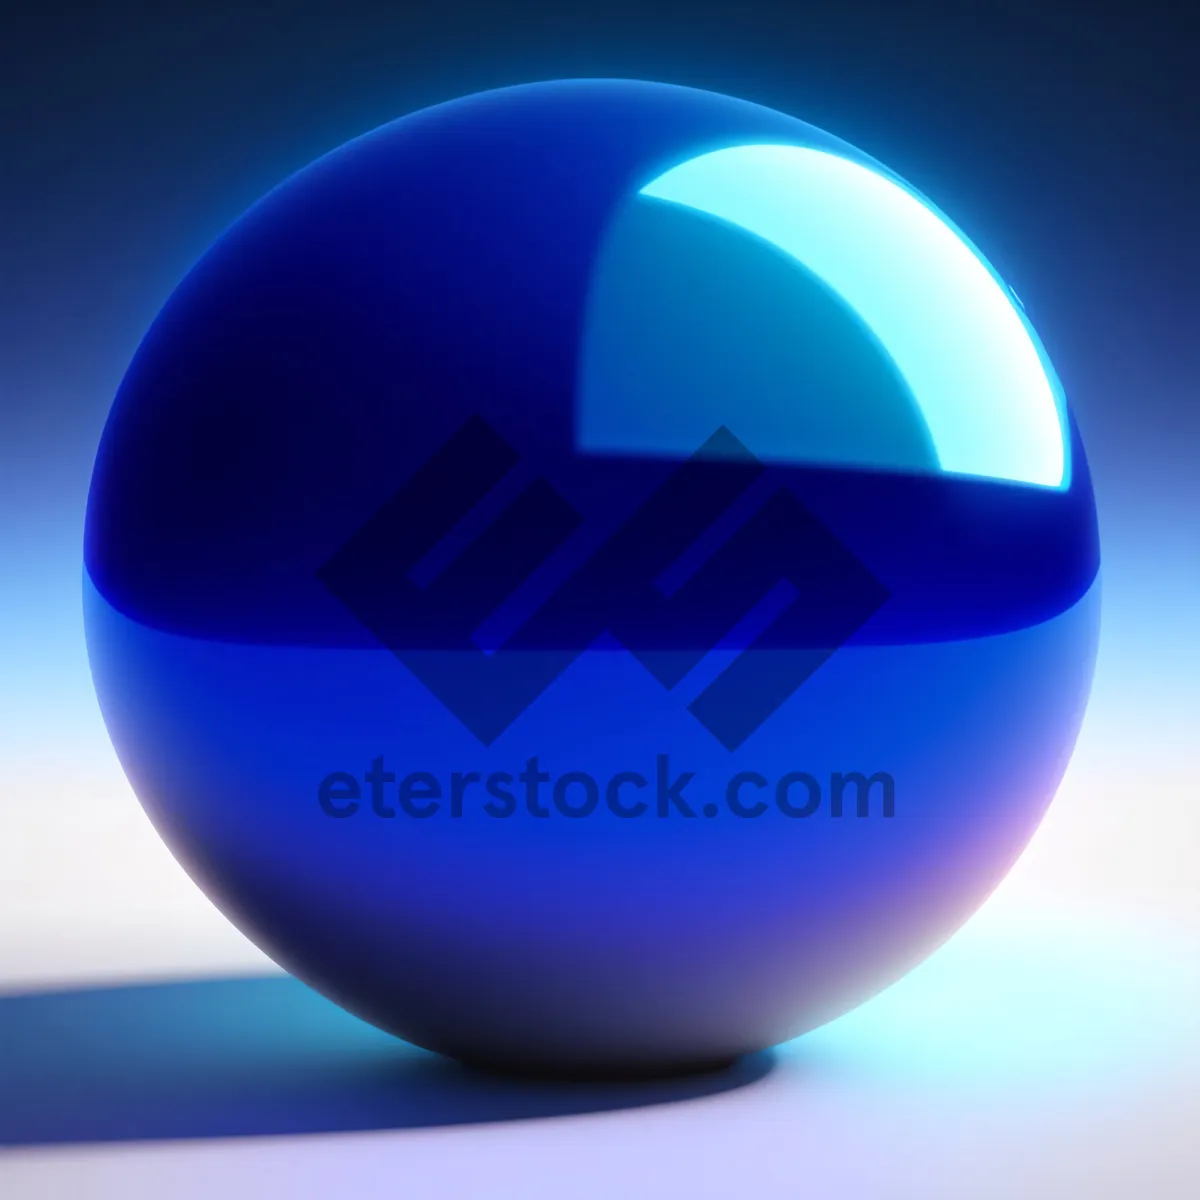 Picture of Shiny Glass Button Icon with Reflection